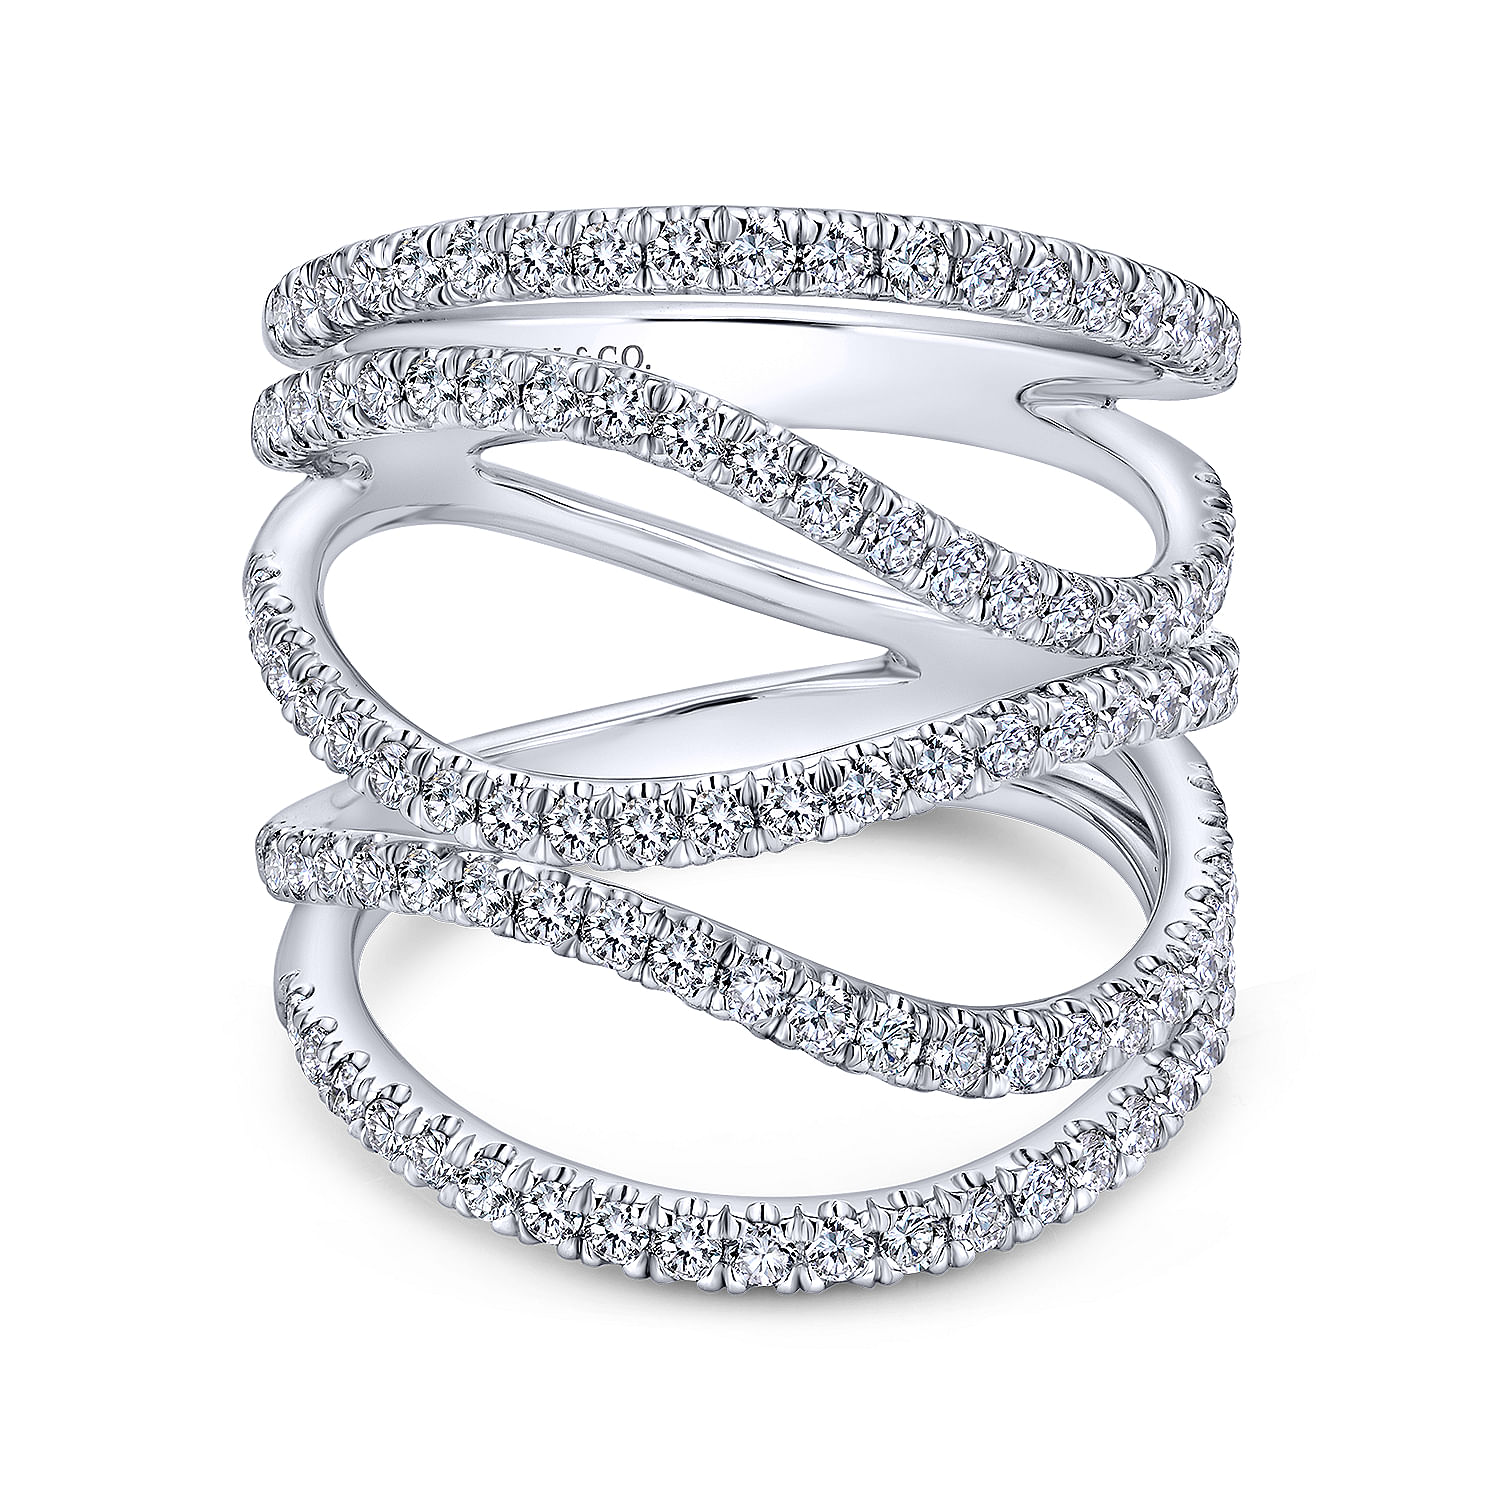 18K White Gold Curving Layered Wide Band Diamond Ring